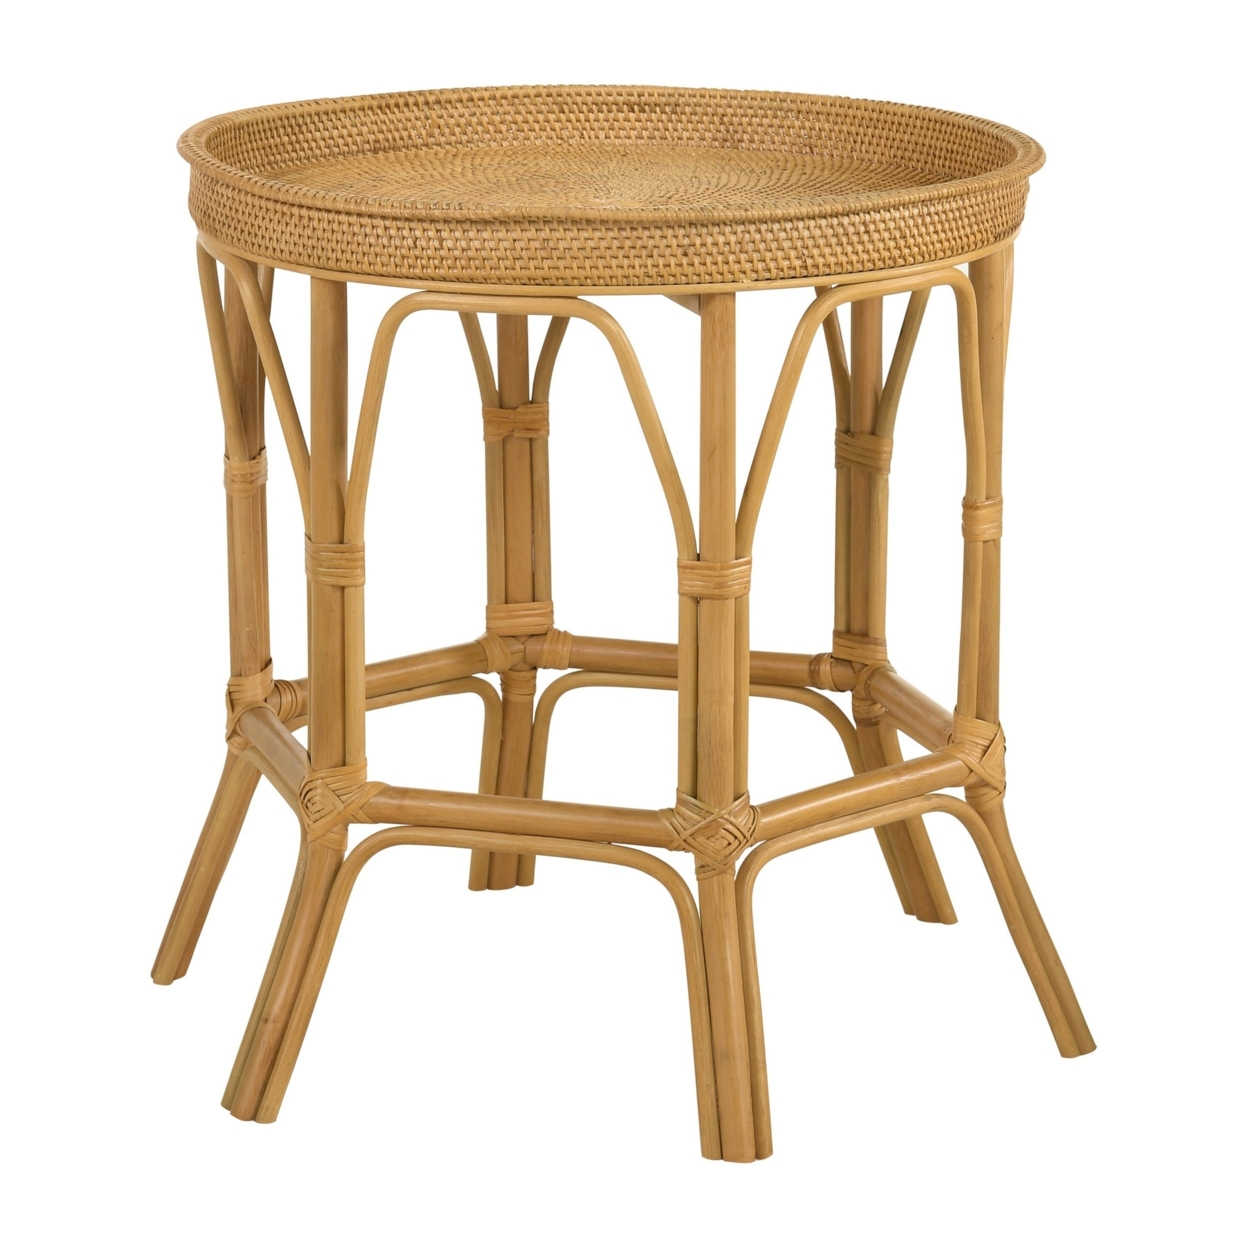 Raya 26 Inch Accent Table, Round Woven Rattan Tray Top, Natural Brown Color- Saltoro Sherpi